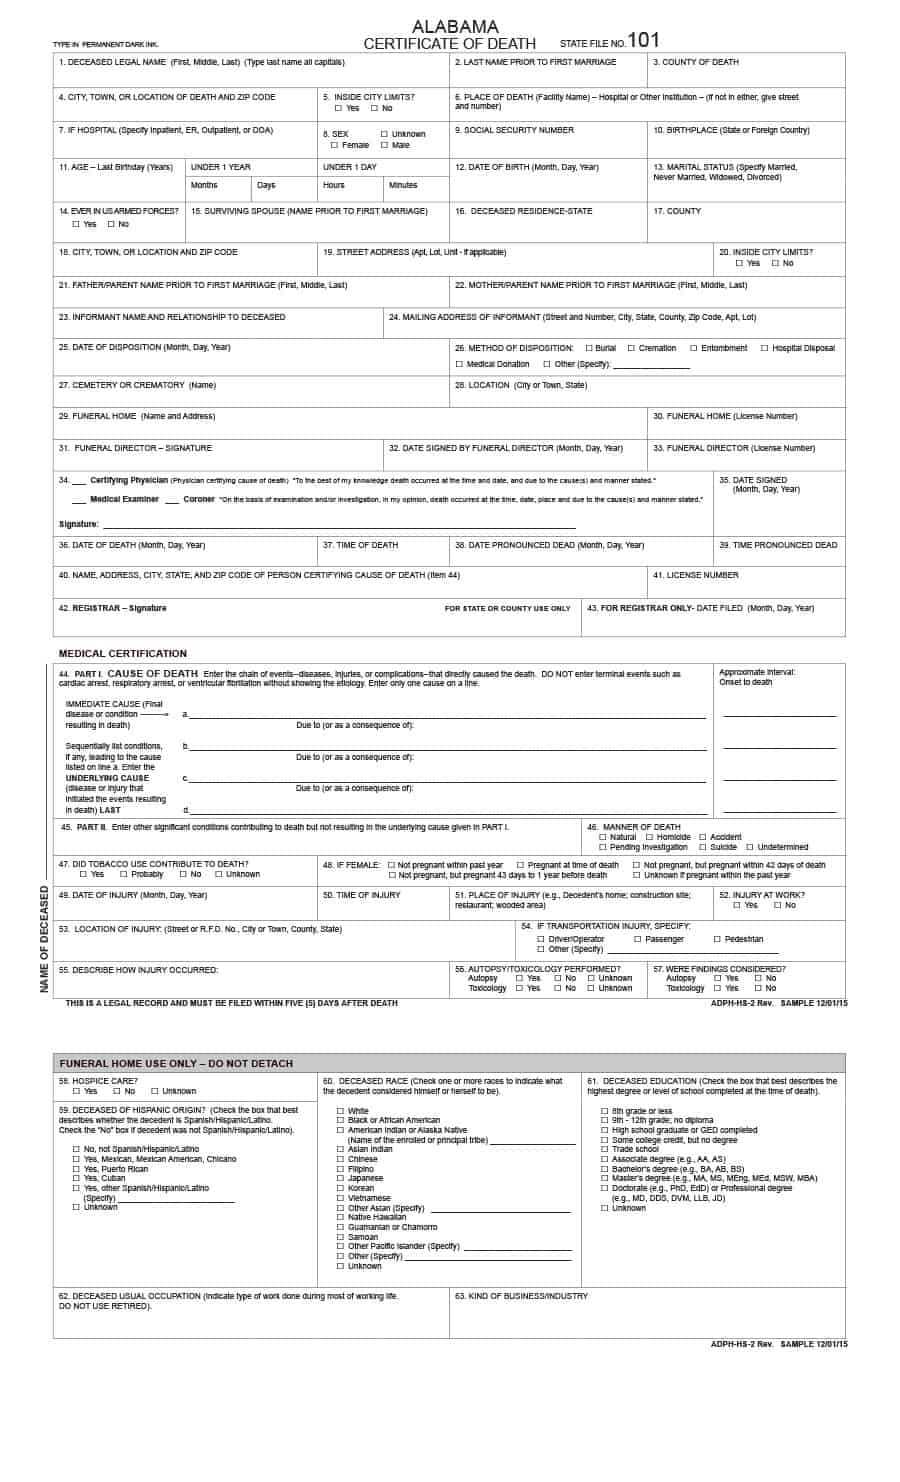 37 Blank Death Certificate Templates [100% Free] ᐅ Template Lab With Regard To Fake Birth Certificate Template